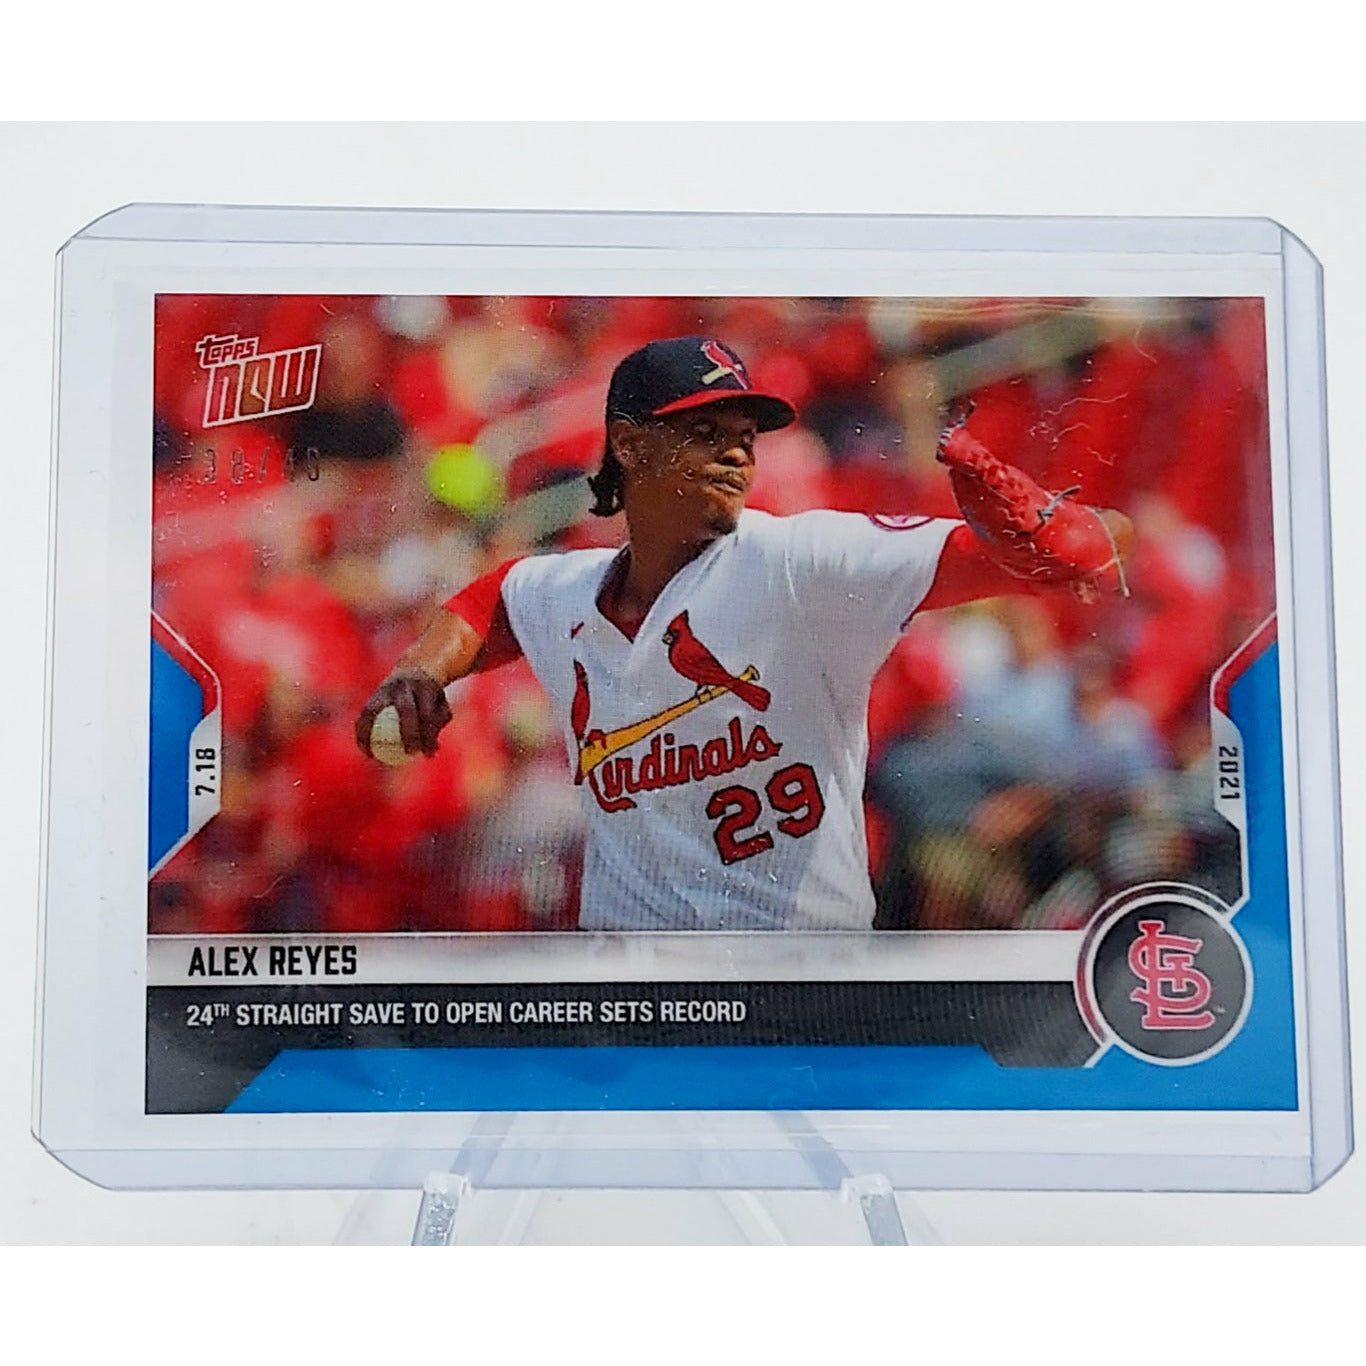 Alex Reyes 24 Straight Saves - 2021 MLB TOPPS NOW Card 523 Blue Parallel #38/49